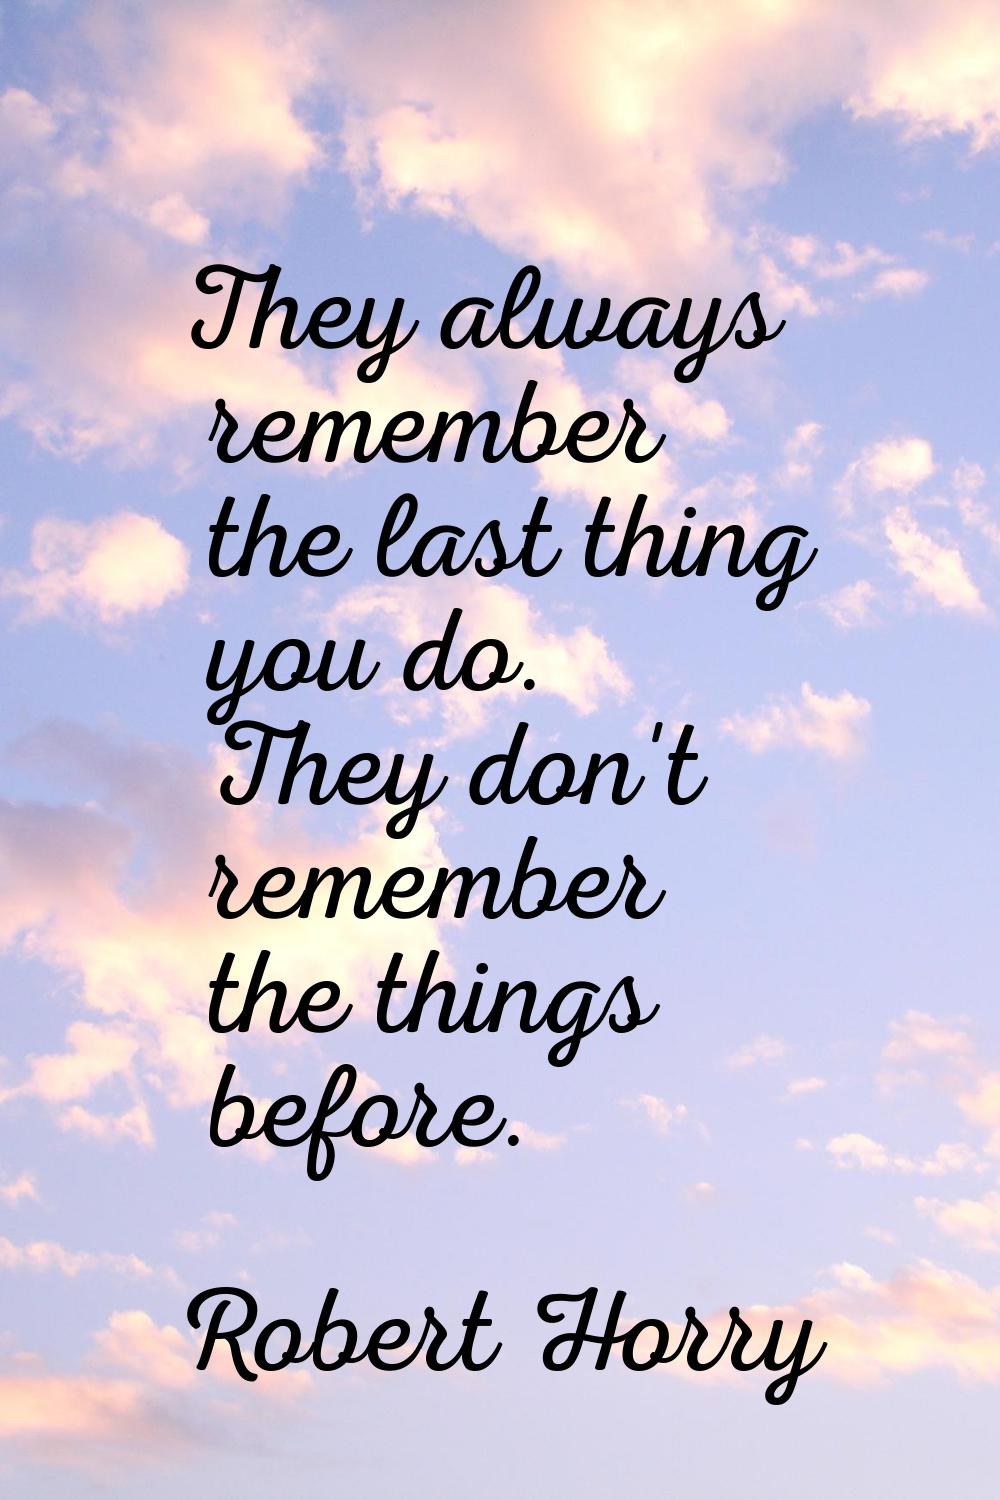 They always remember the last thing you do. They don't remember the things before.